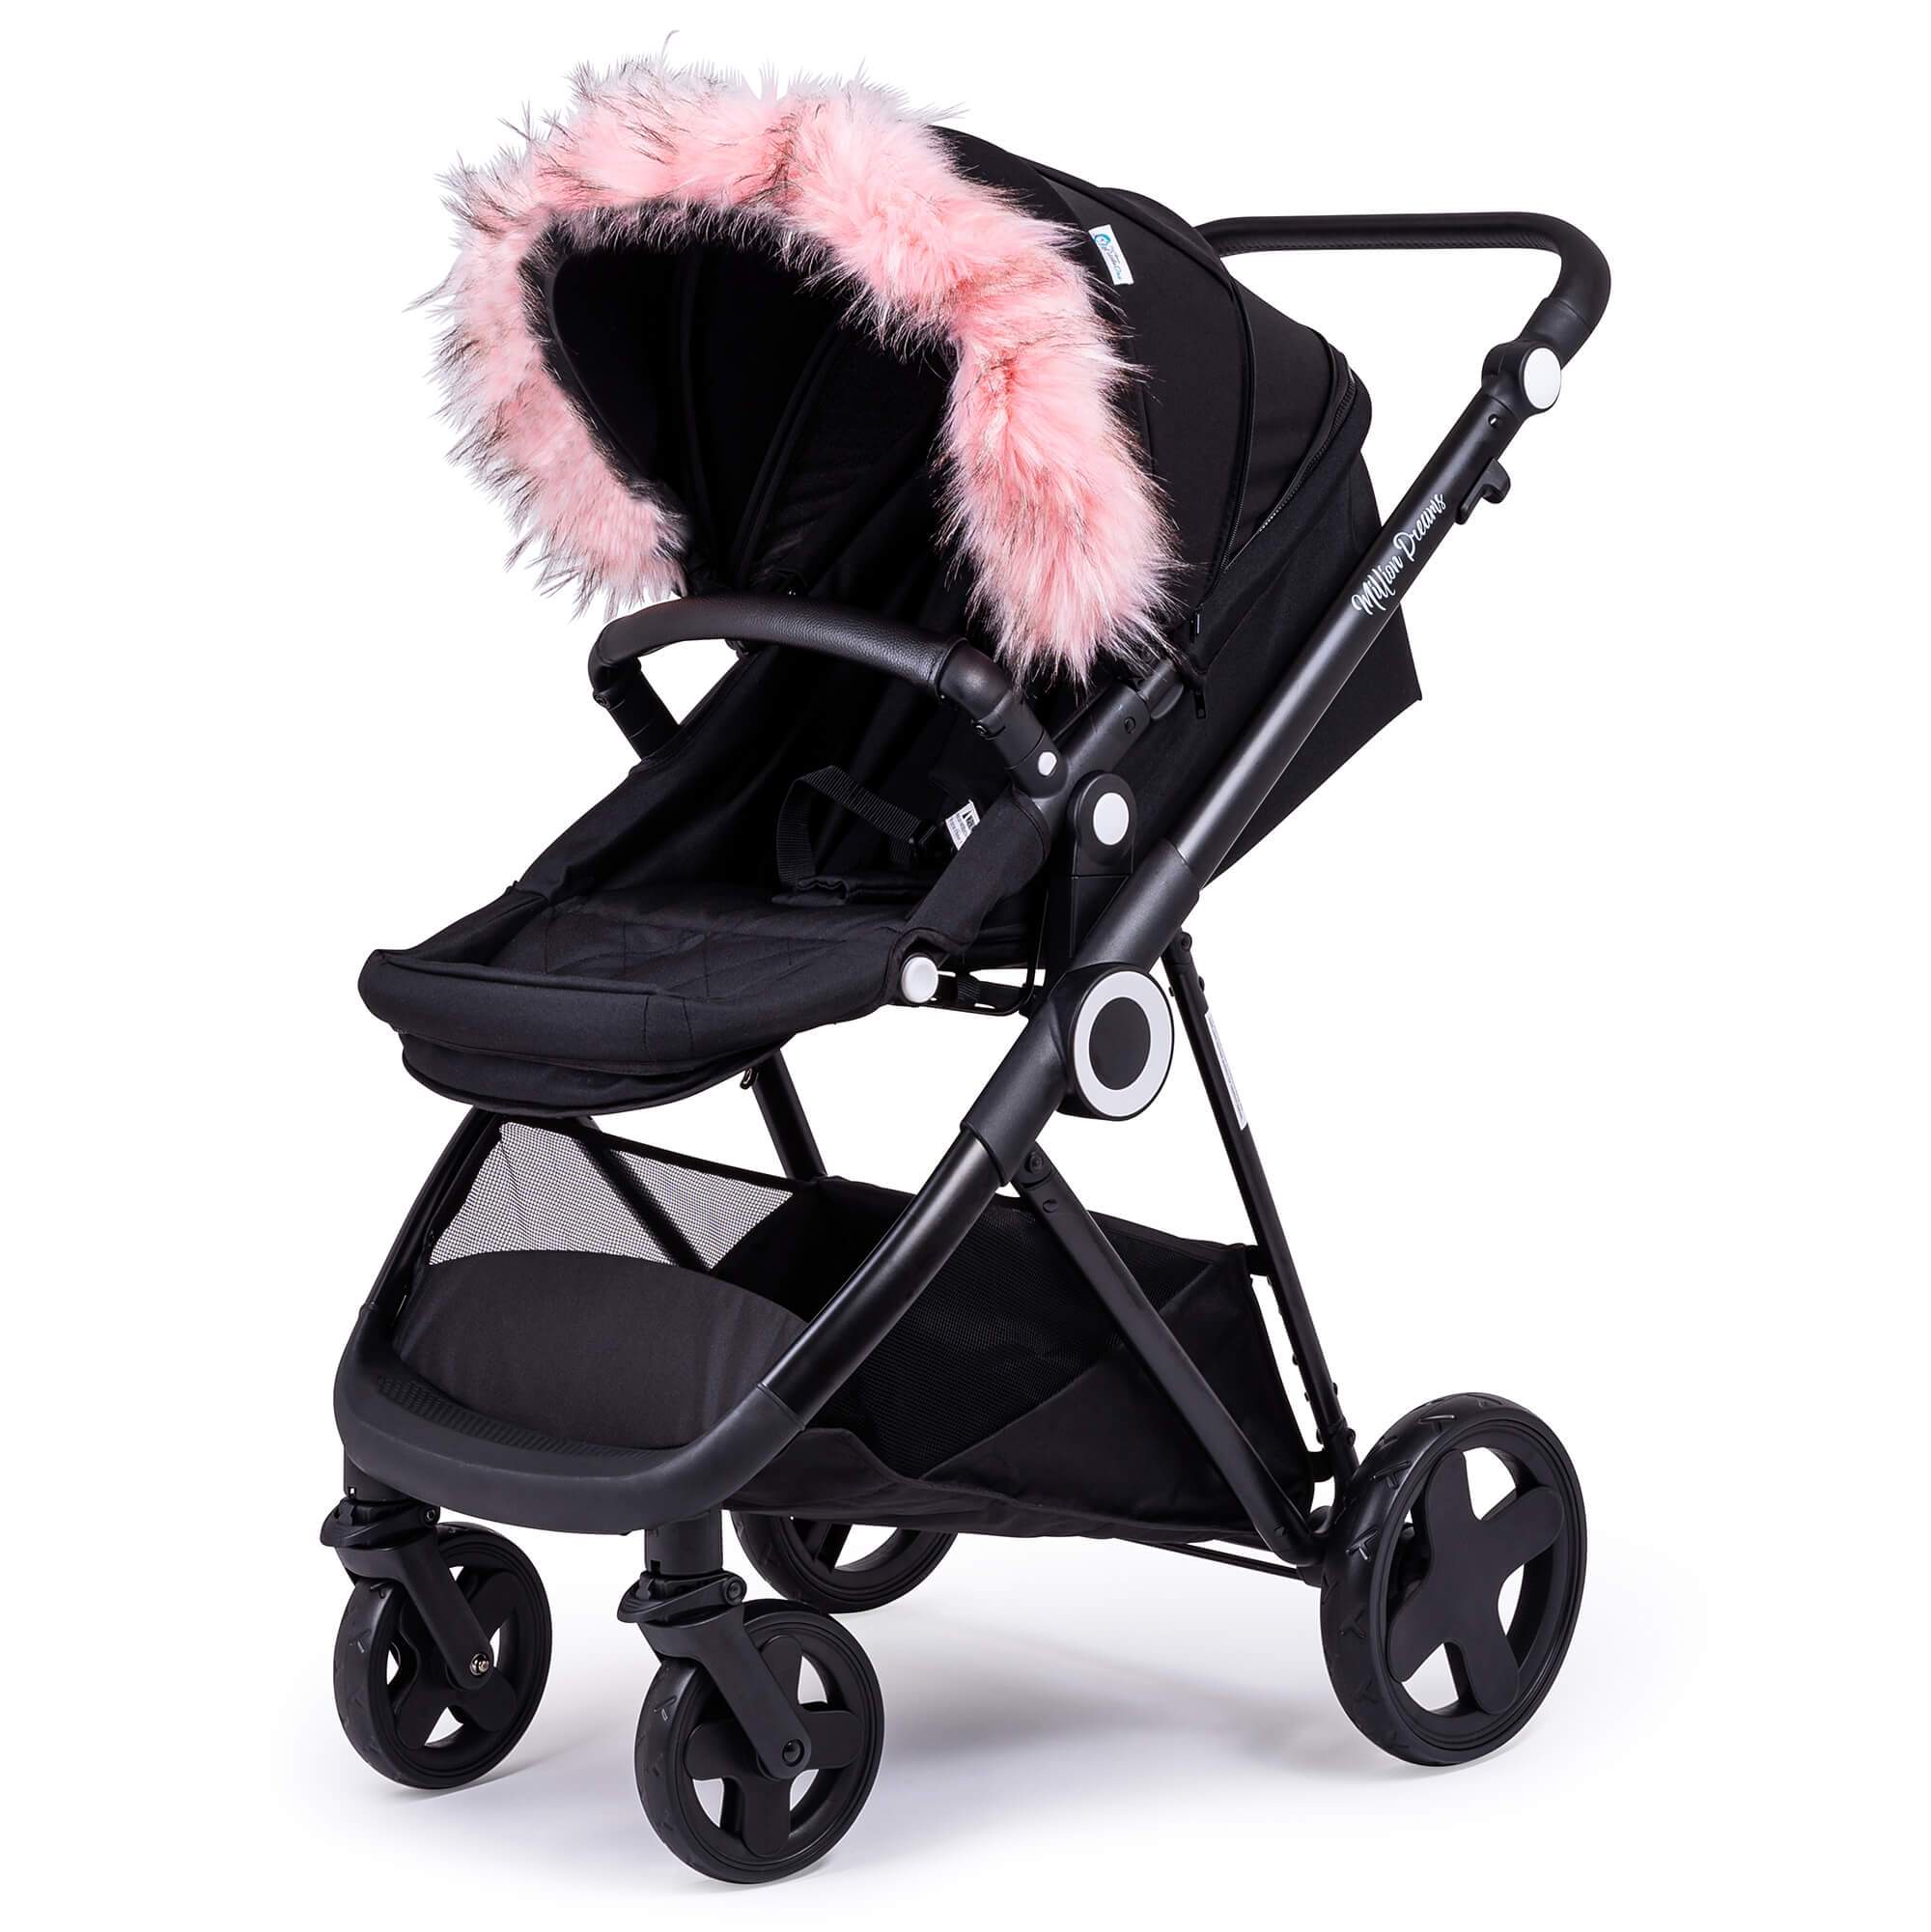 Pram Fur Hood Trim Attachment for Pushchair Compatible with Bumbleride - Light Pink / Fits All Models | For Your Little One